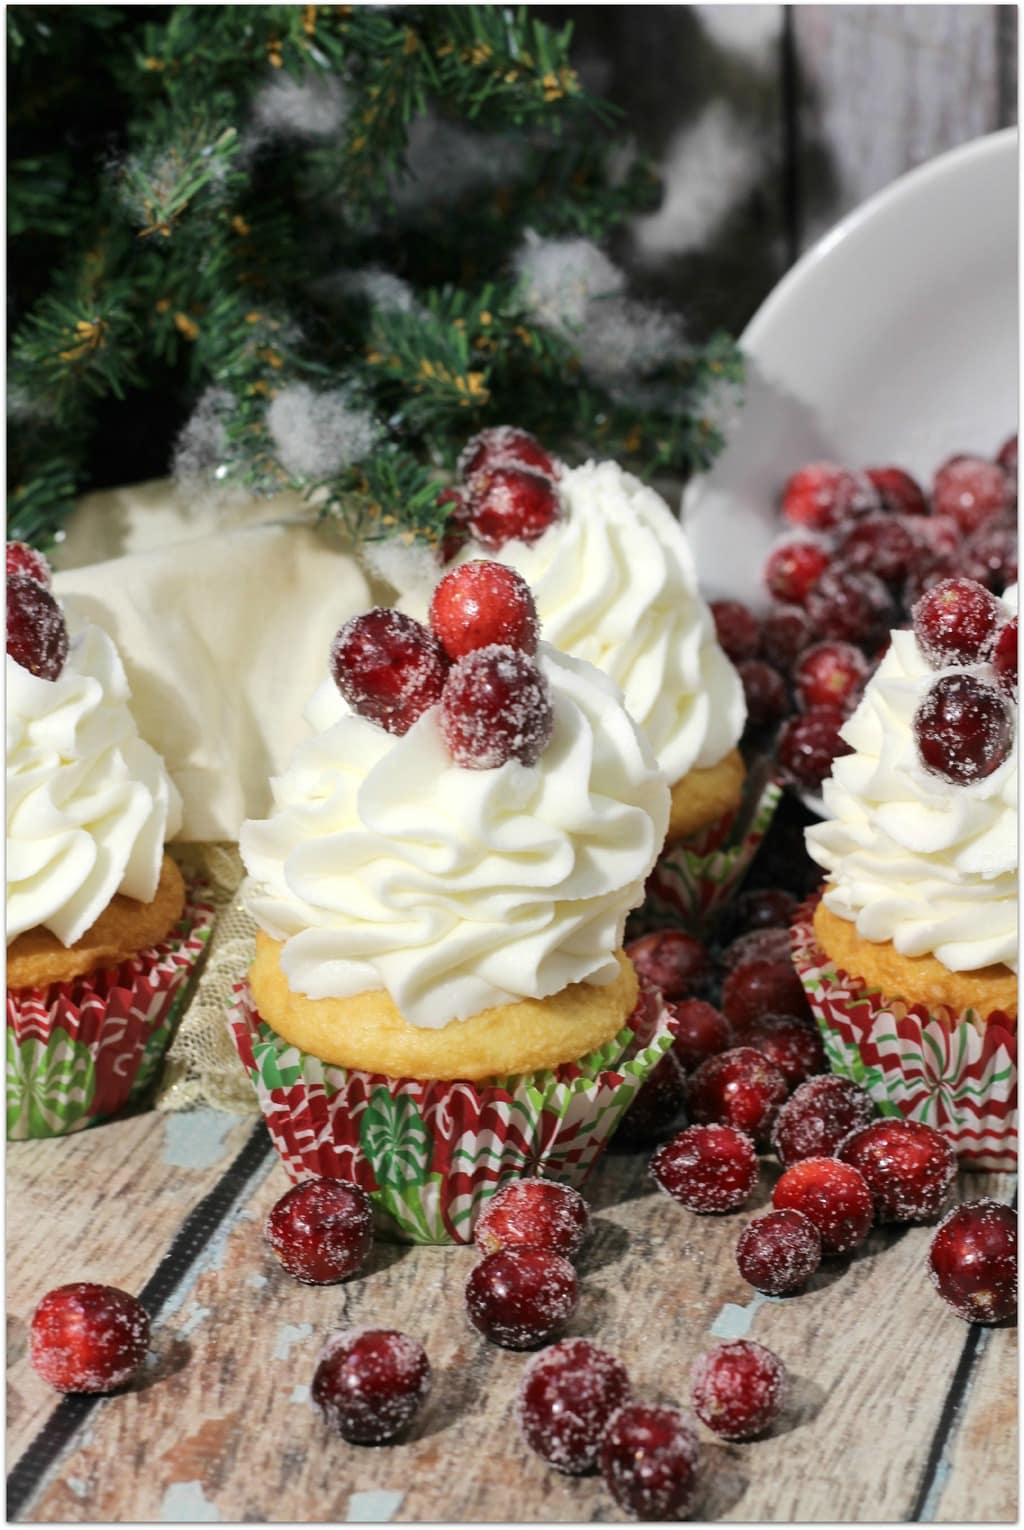 I love cranberry anything, and these Cranberry Bliss Cupcakes are the perfect Christmas dessert! I think cupcakes are the perfect sweet treat after a meal and I love them for school parties, too! This recipe has a couple of extra steps, but it's worth it in the end! You will love the results!